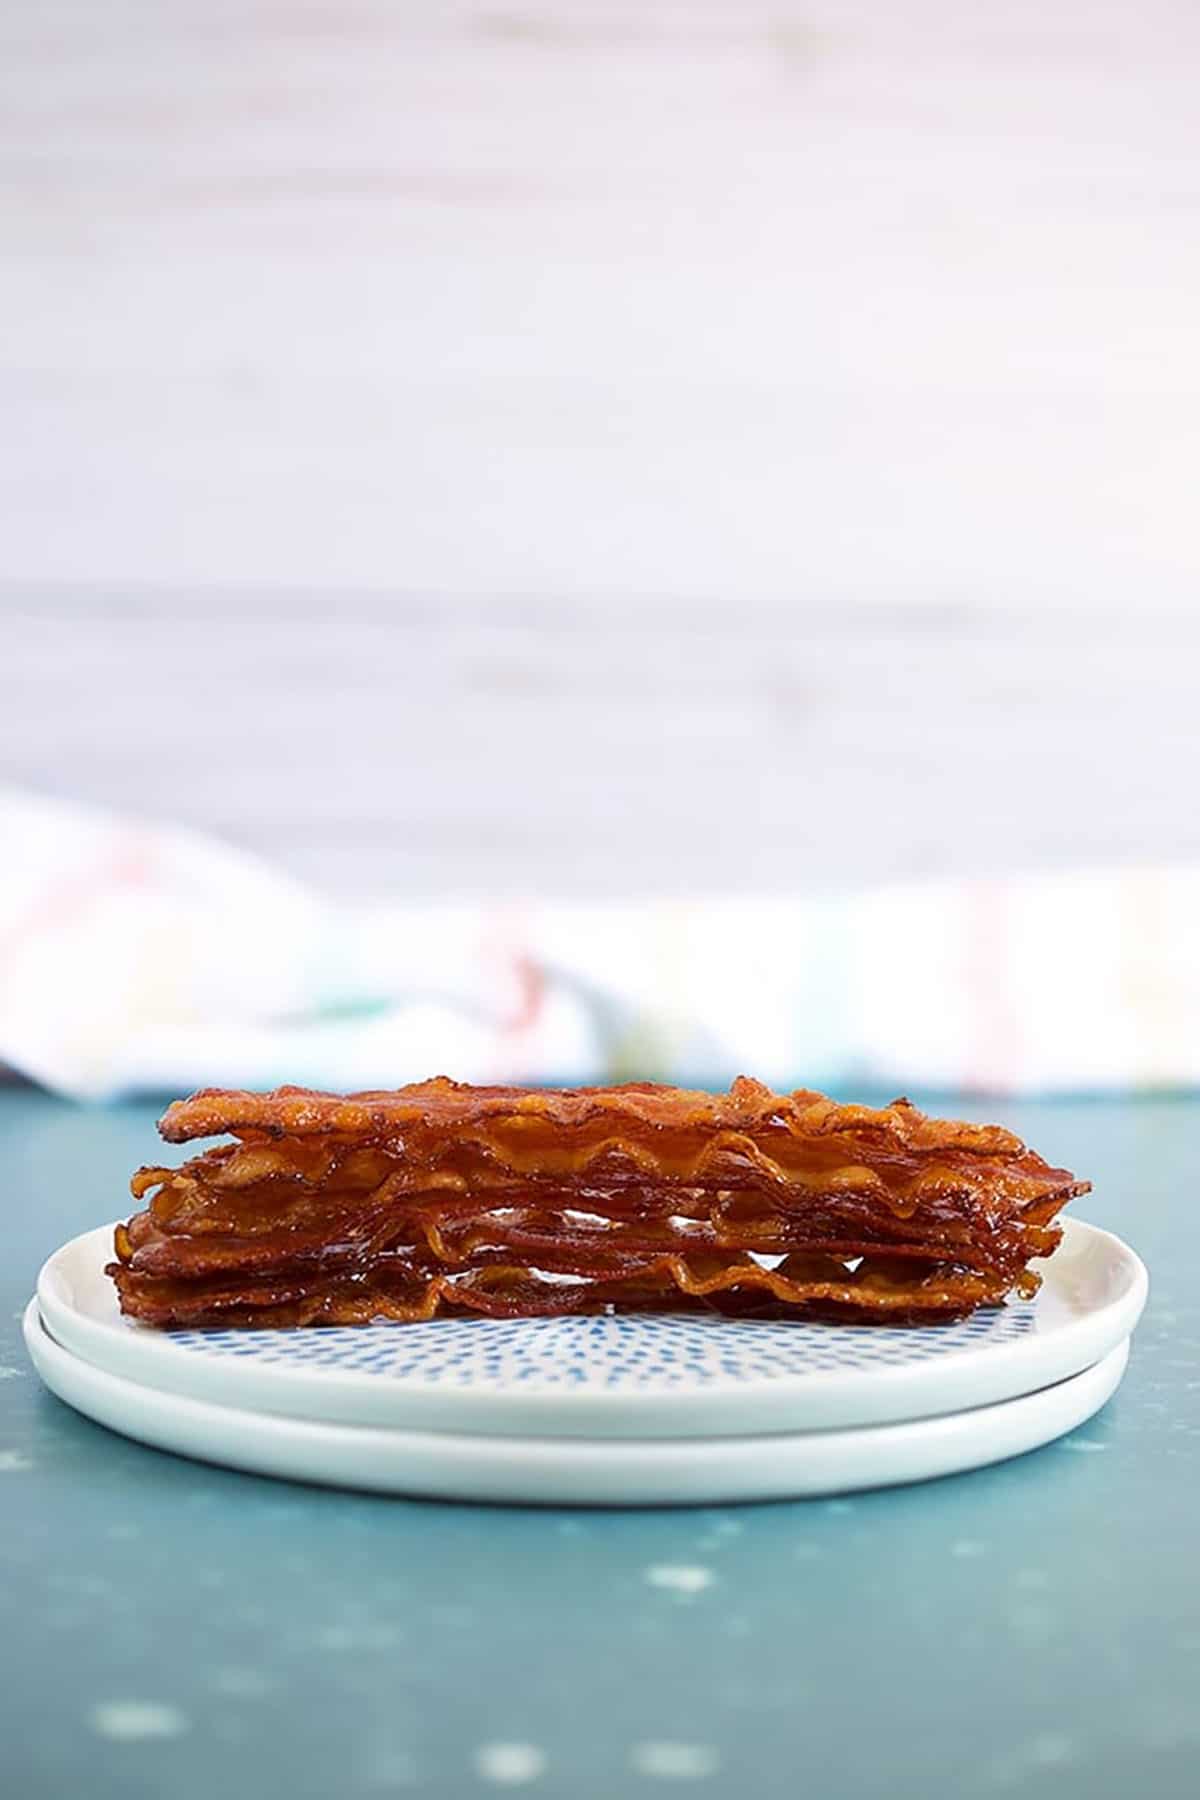 8 stacked bacon slices on a white plate on a blue background.